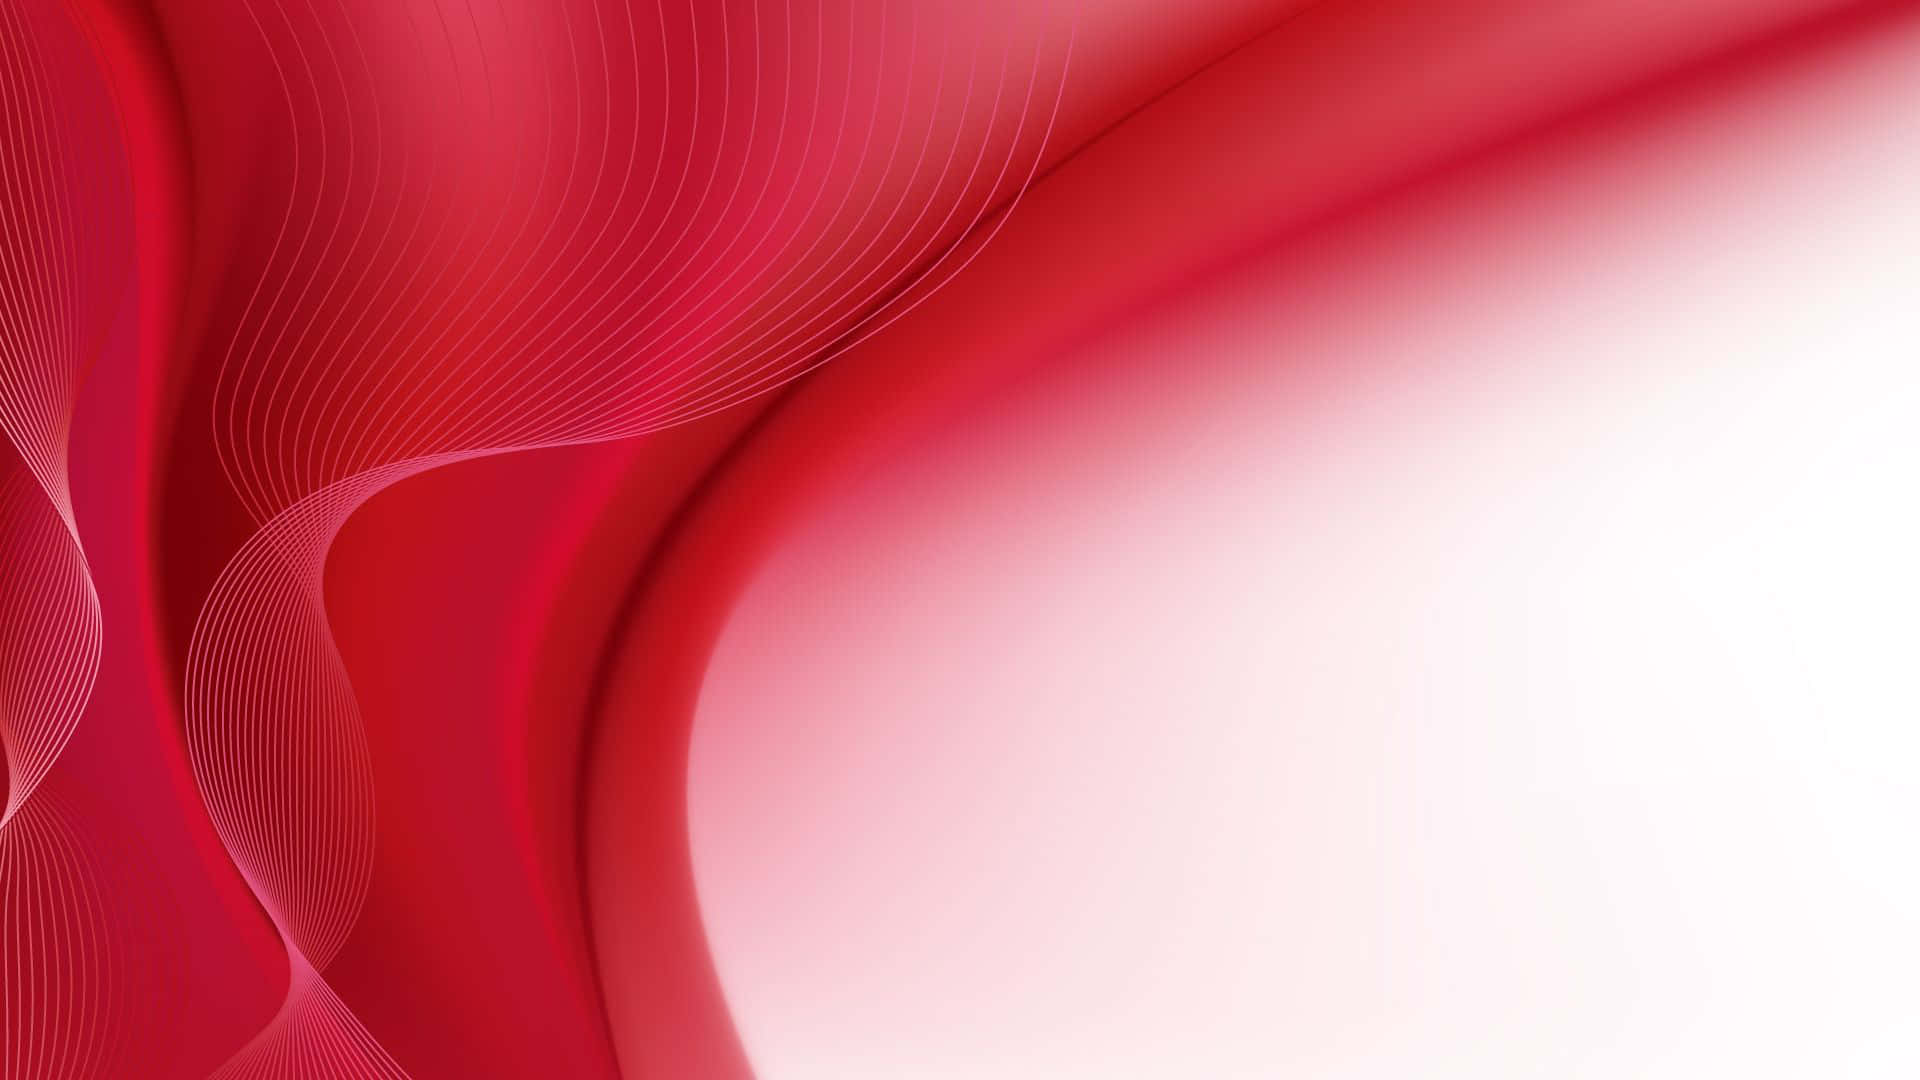 Aesthetic beauty in red and white. Wallpaper